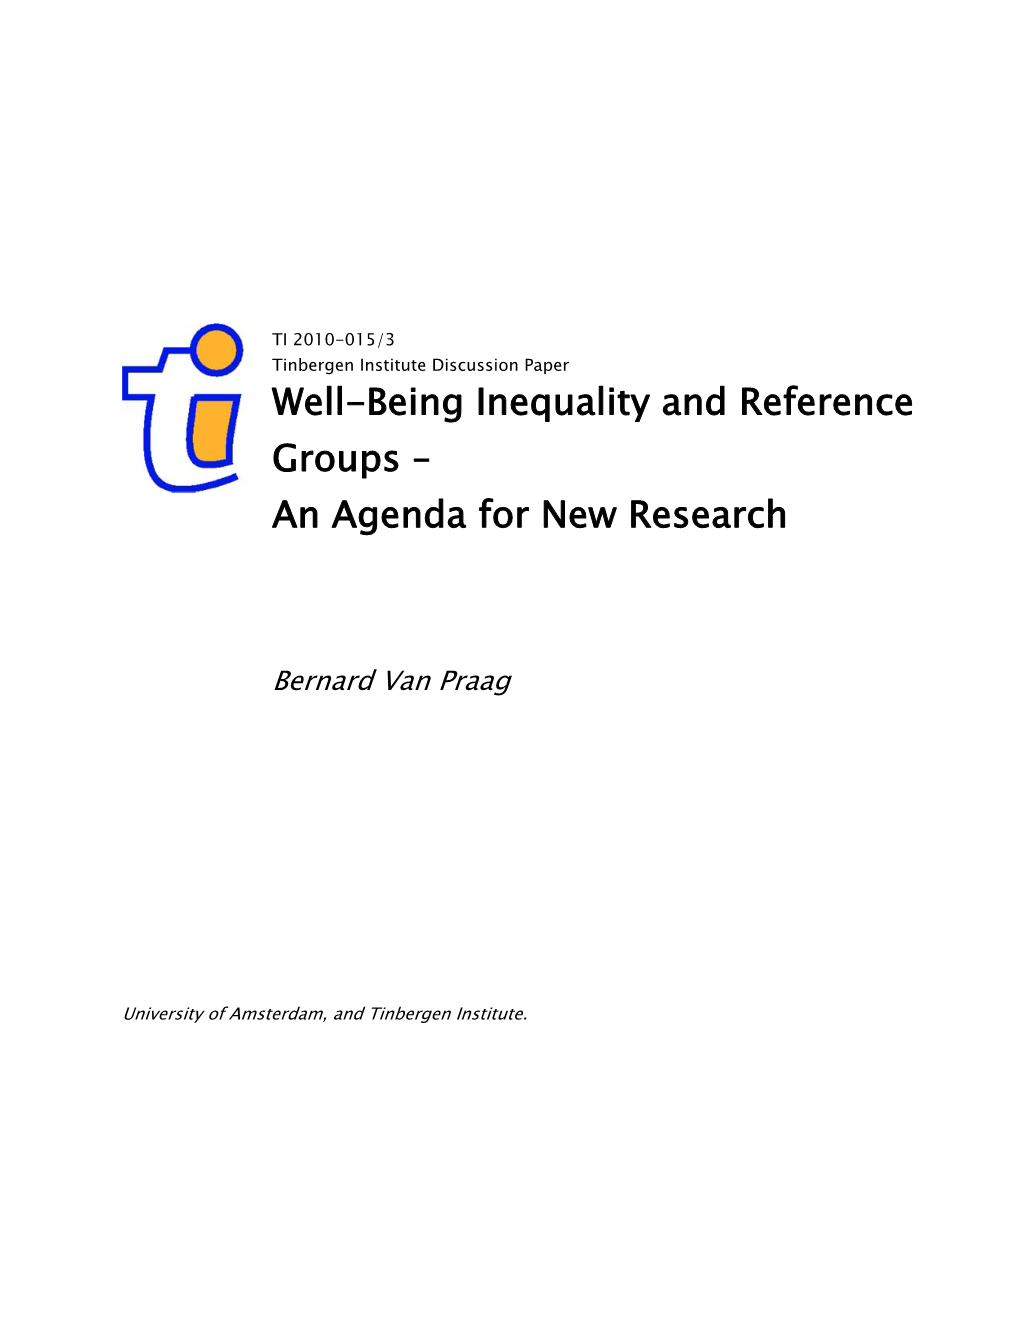 Well-Being Inequality and Reference Groups –